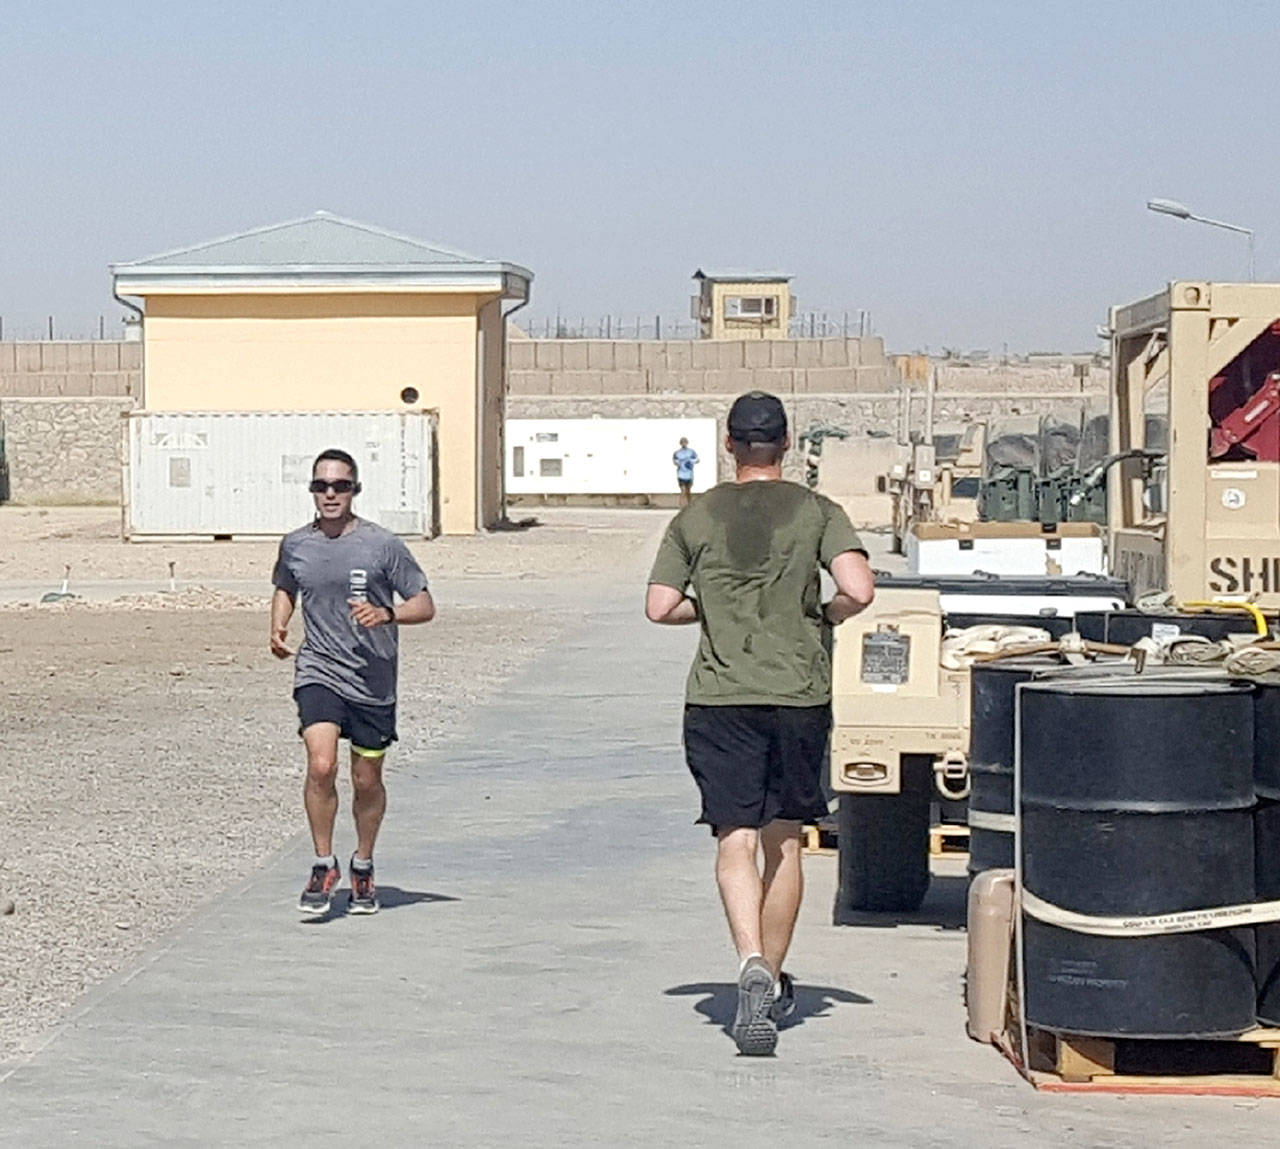 Participants in the Run for Joe “shadow run” in Afghanistan run to raise awareness for the Captain Joseph House in Port Angeles.